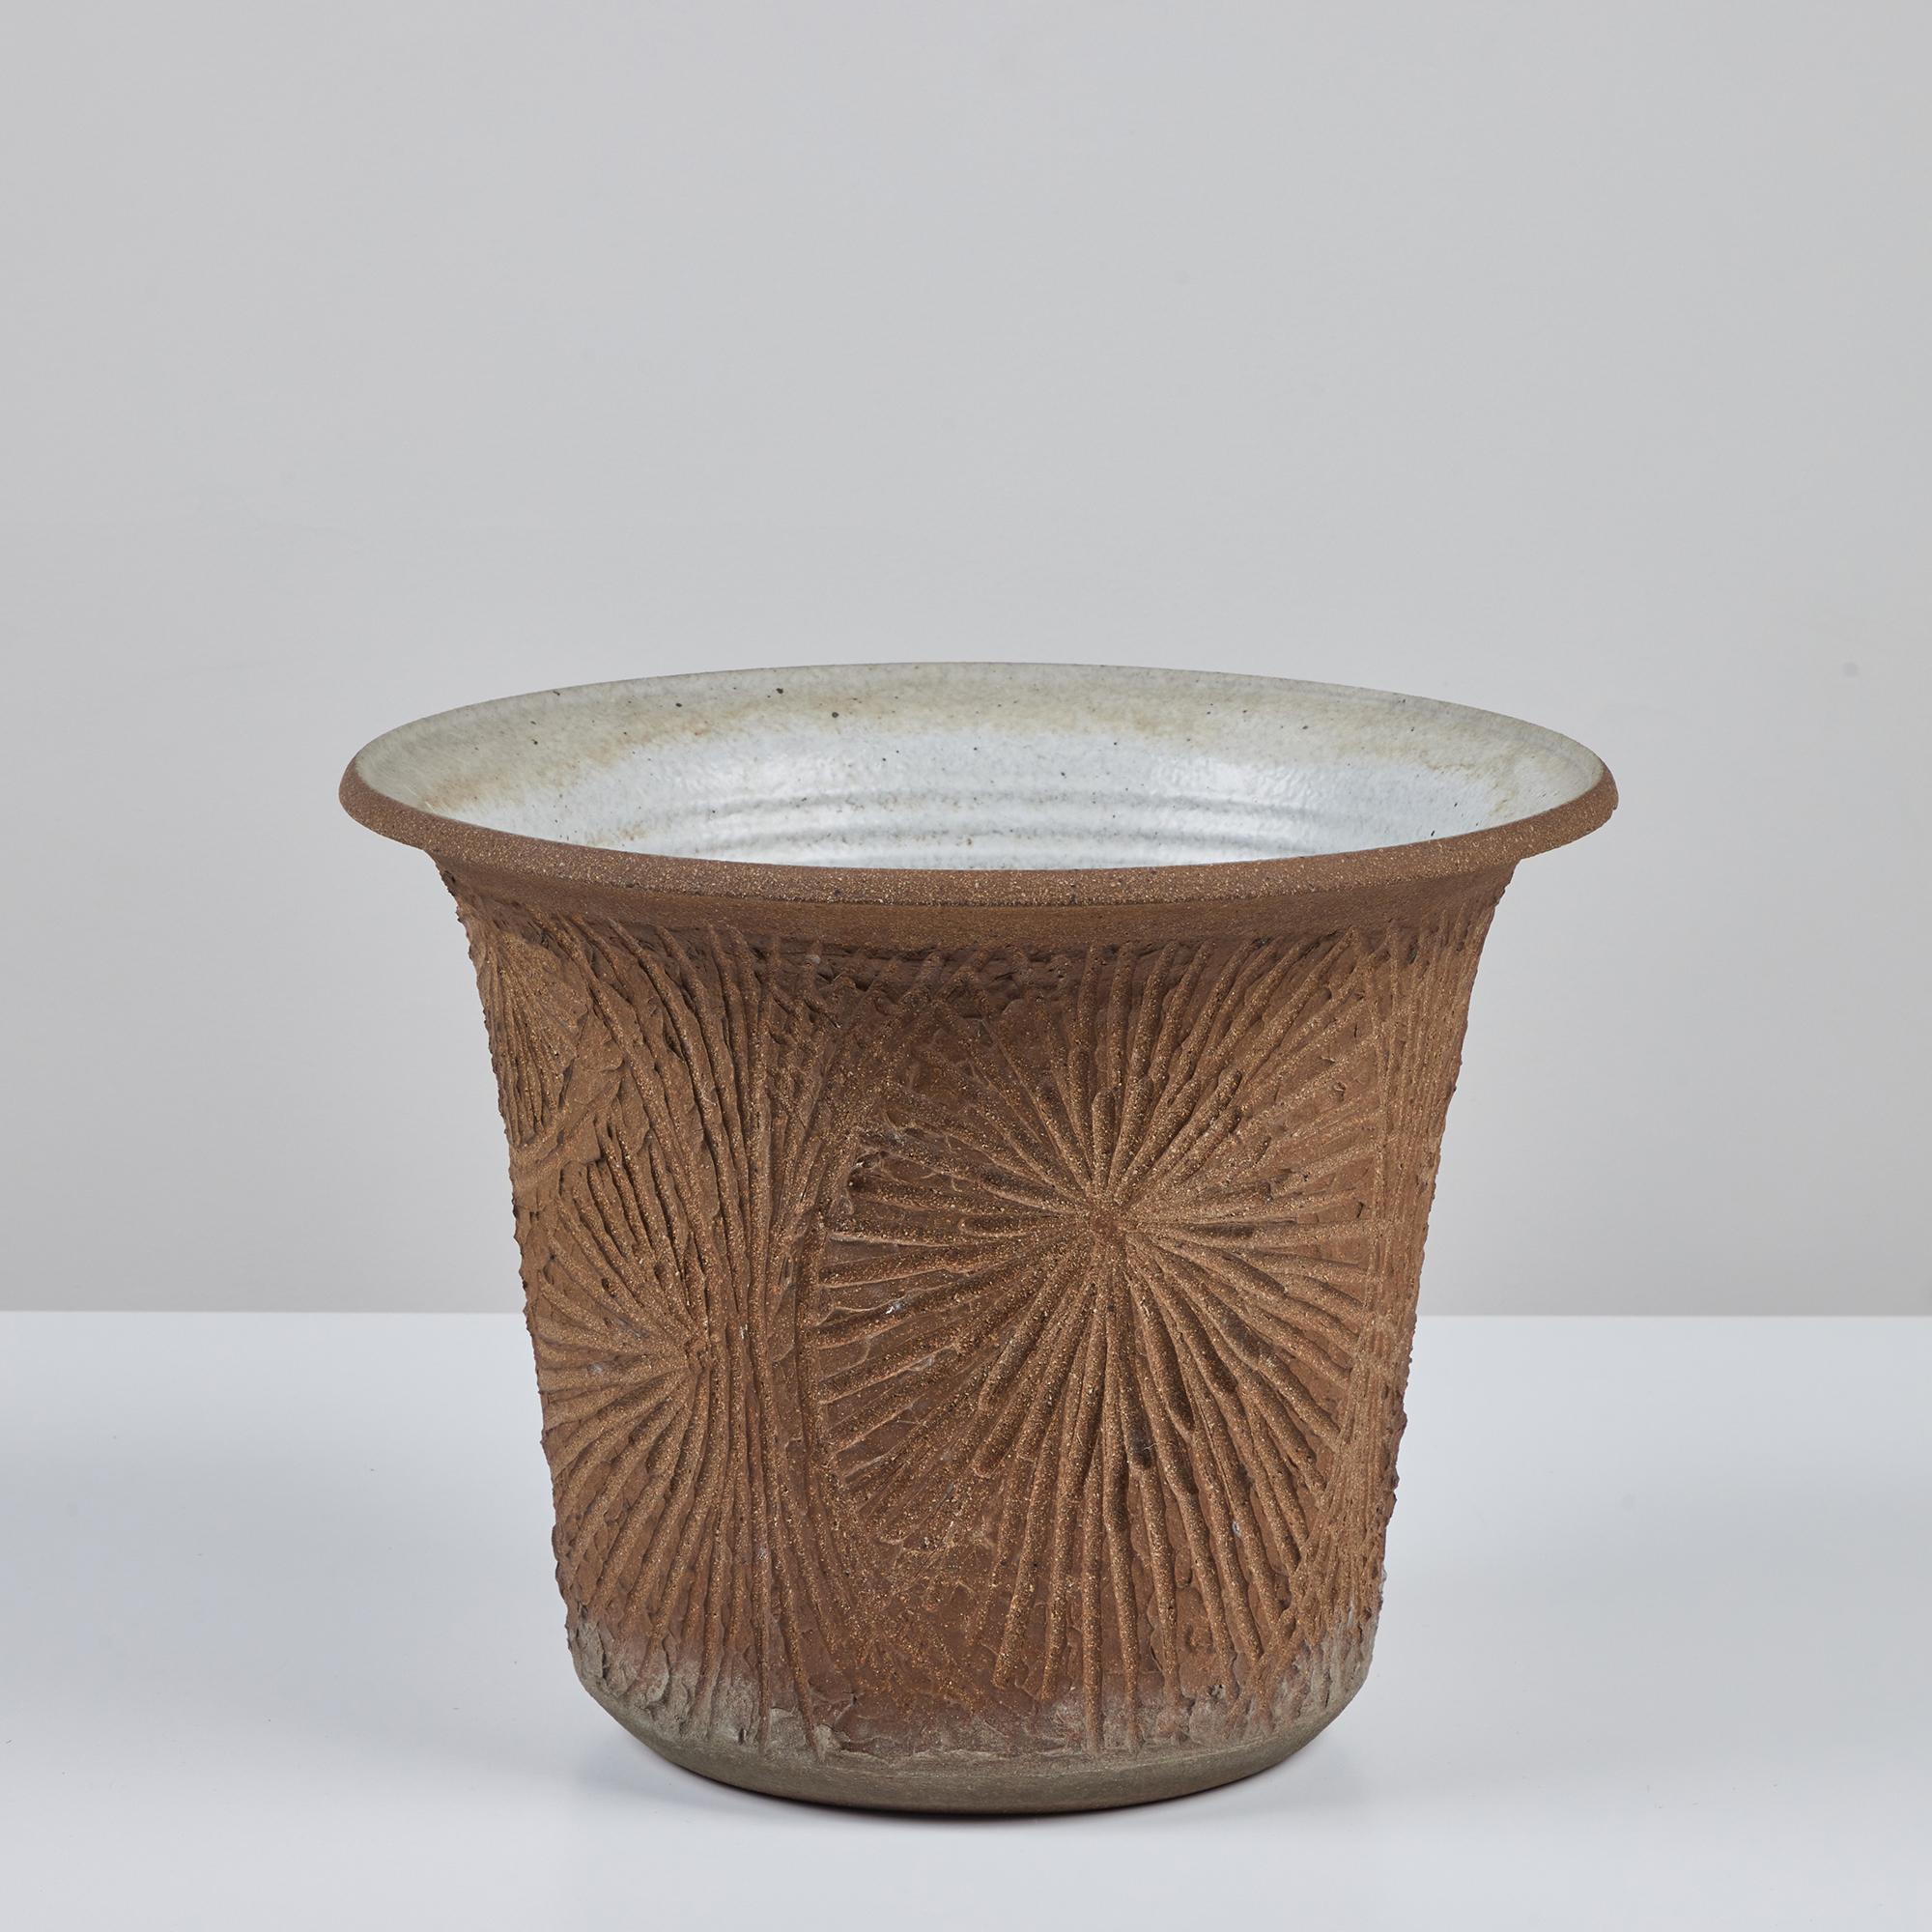 Hand thrown studio pottery planter by California ceramics artist Robert Maxwell, c.1970s. This example has a tulip shape that flares at the lip. It is decorated with Maxwell's signature incised designs, of sunbursts and thumbprints. The interior is